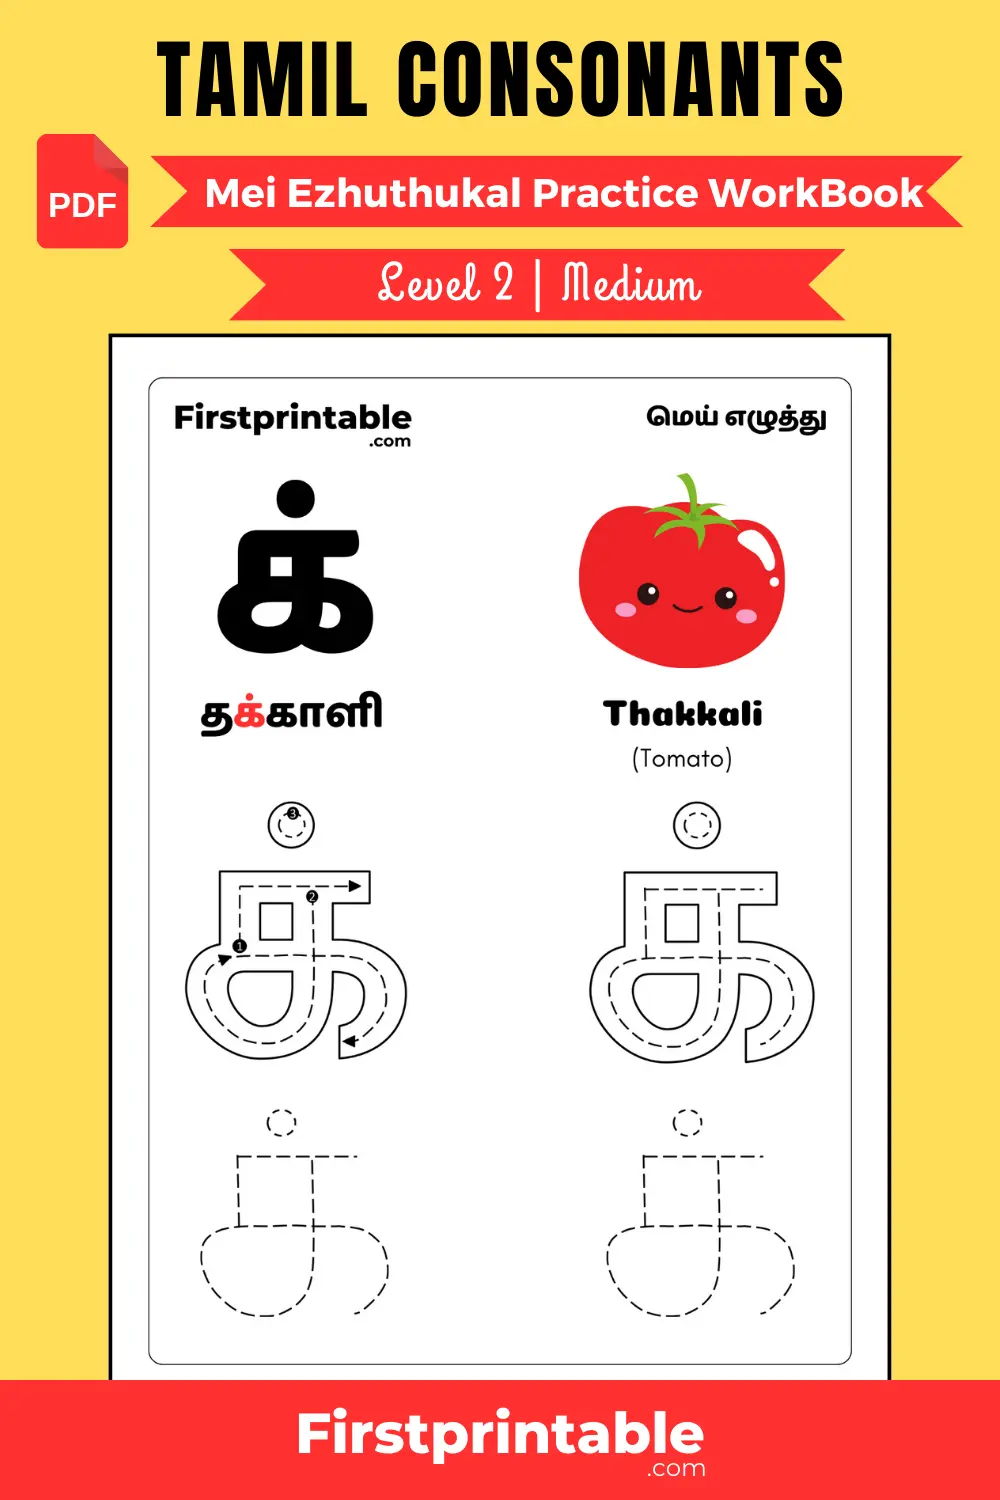 This image helps to practice Tamil consonants with images for kids